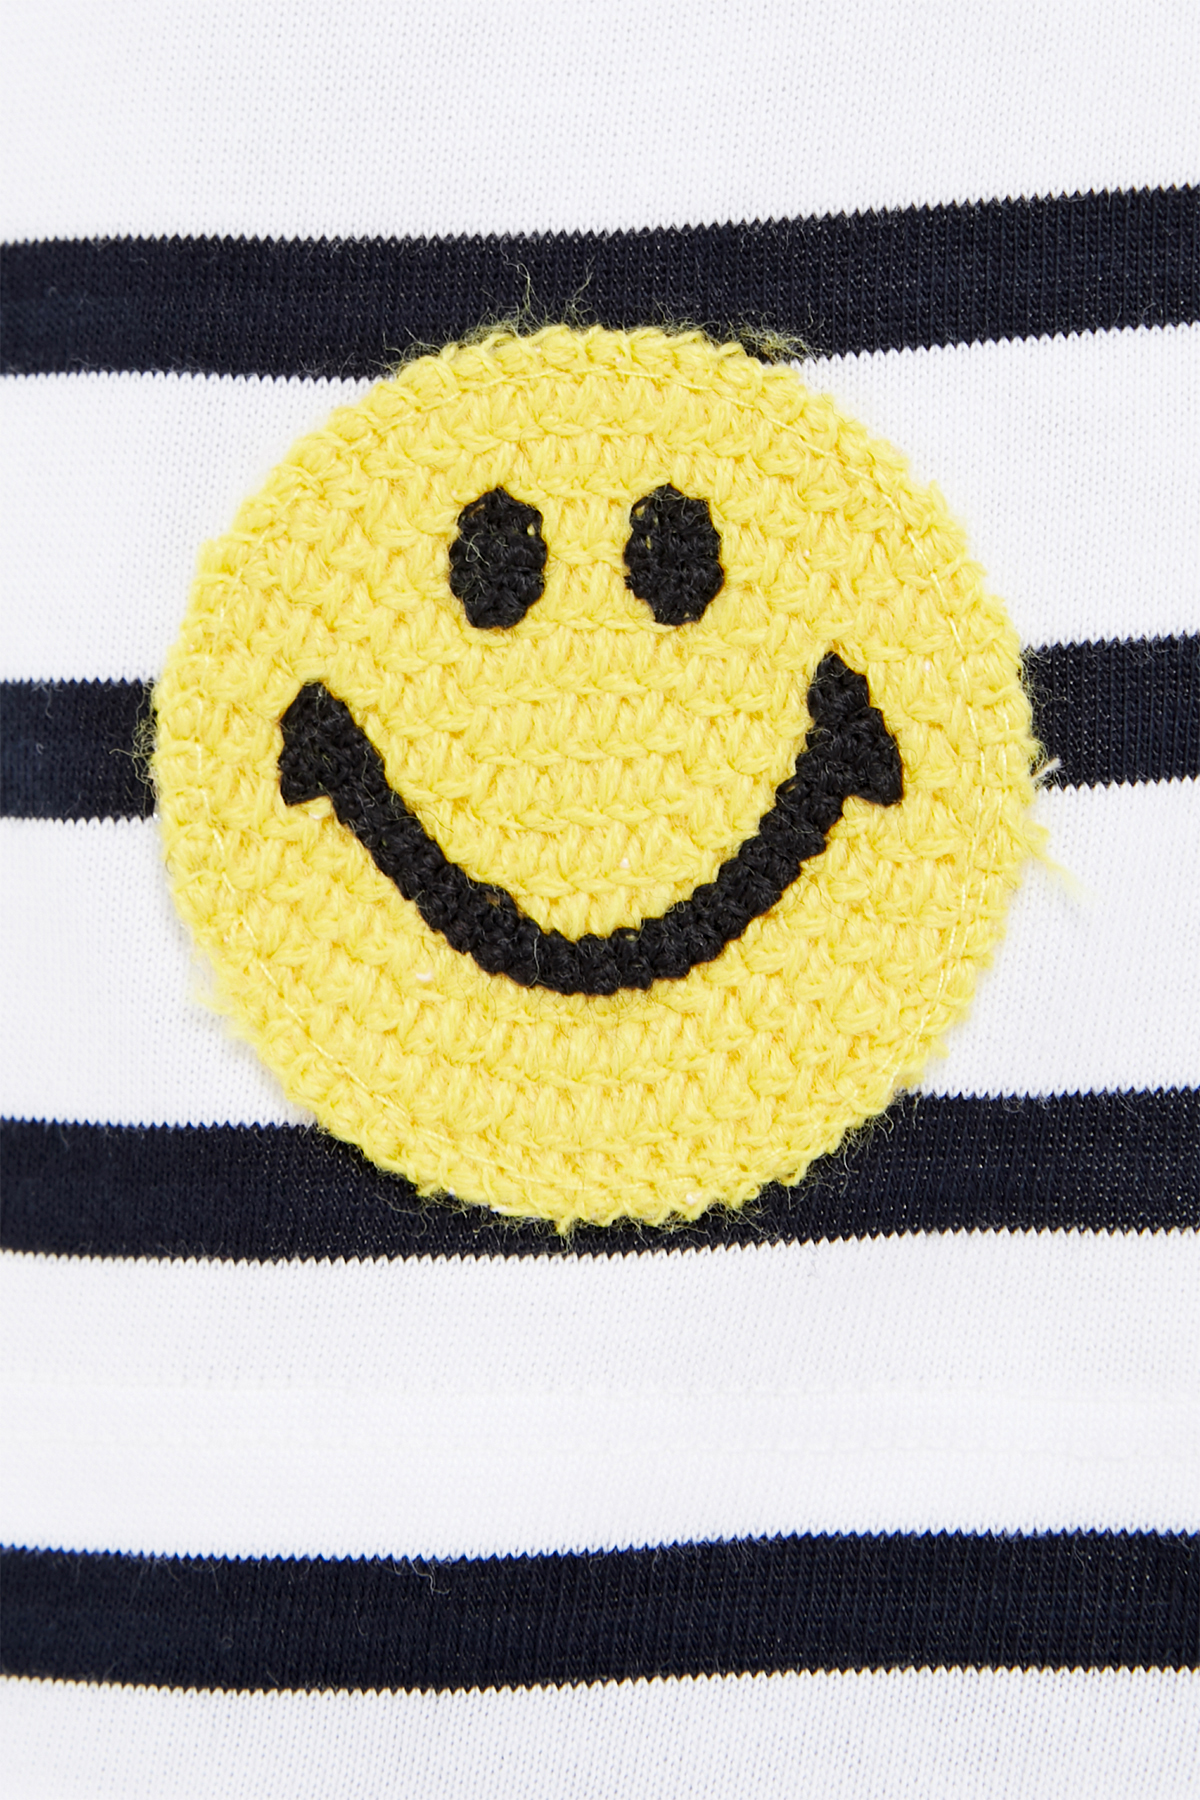 Striped Smiley Shorts